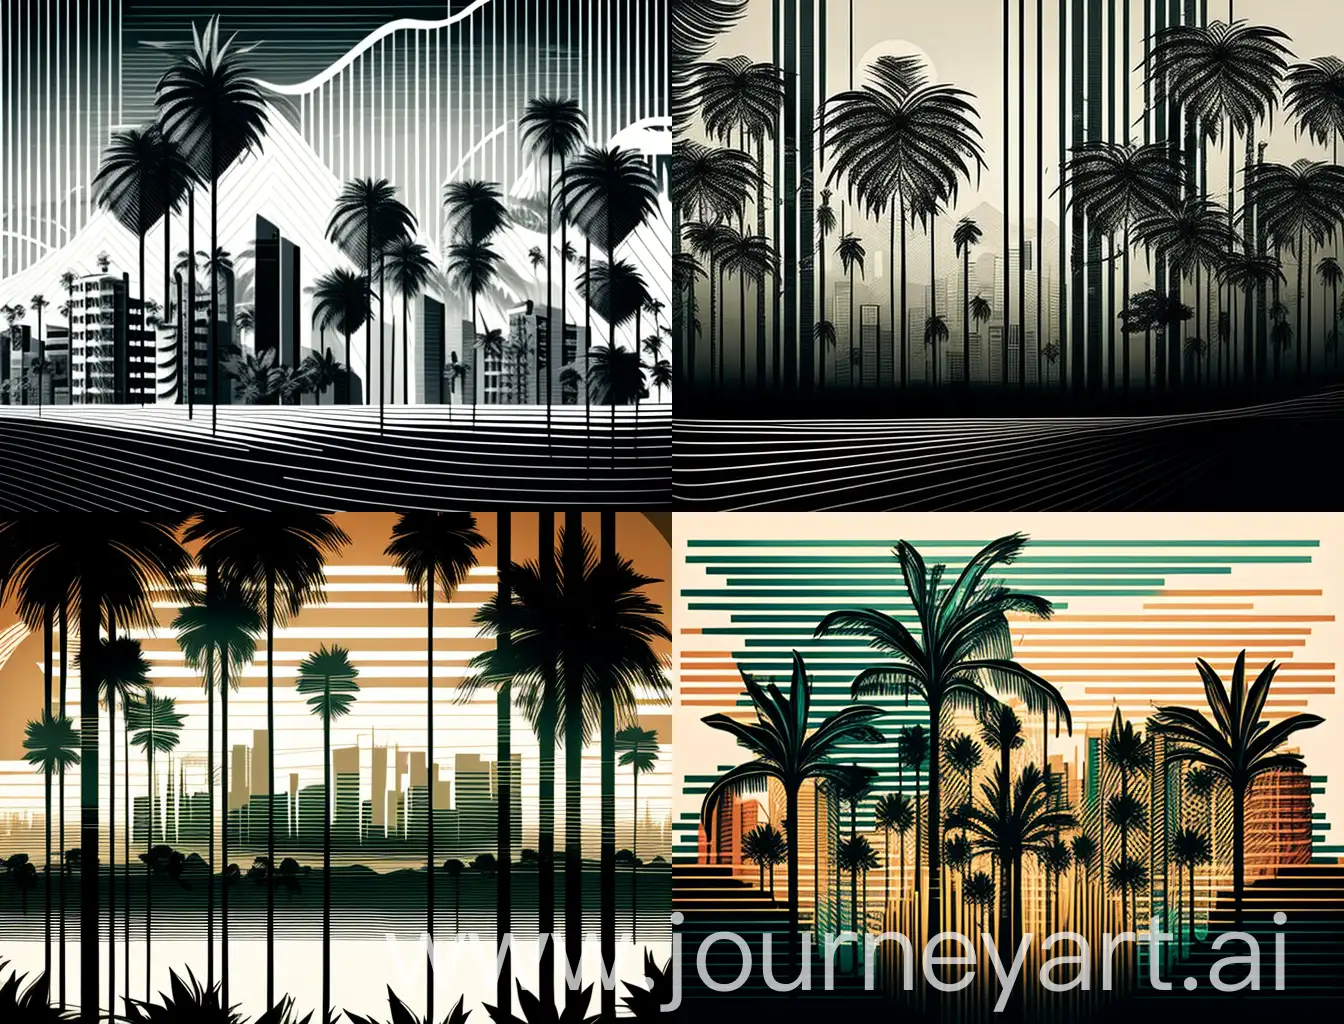 urban cities made of several thin stripes, with coconut trees